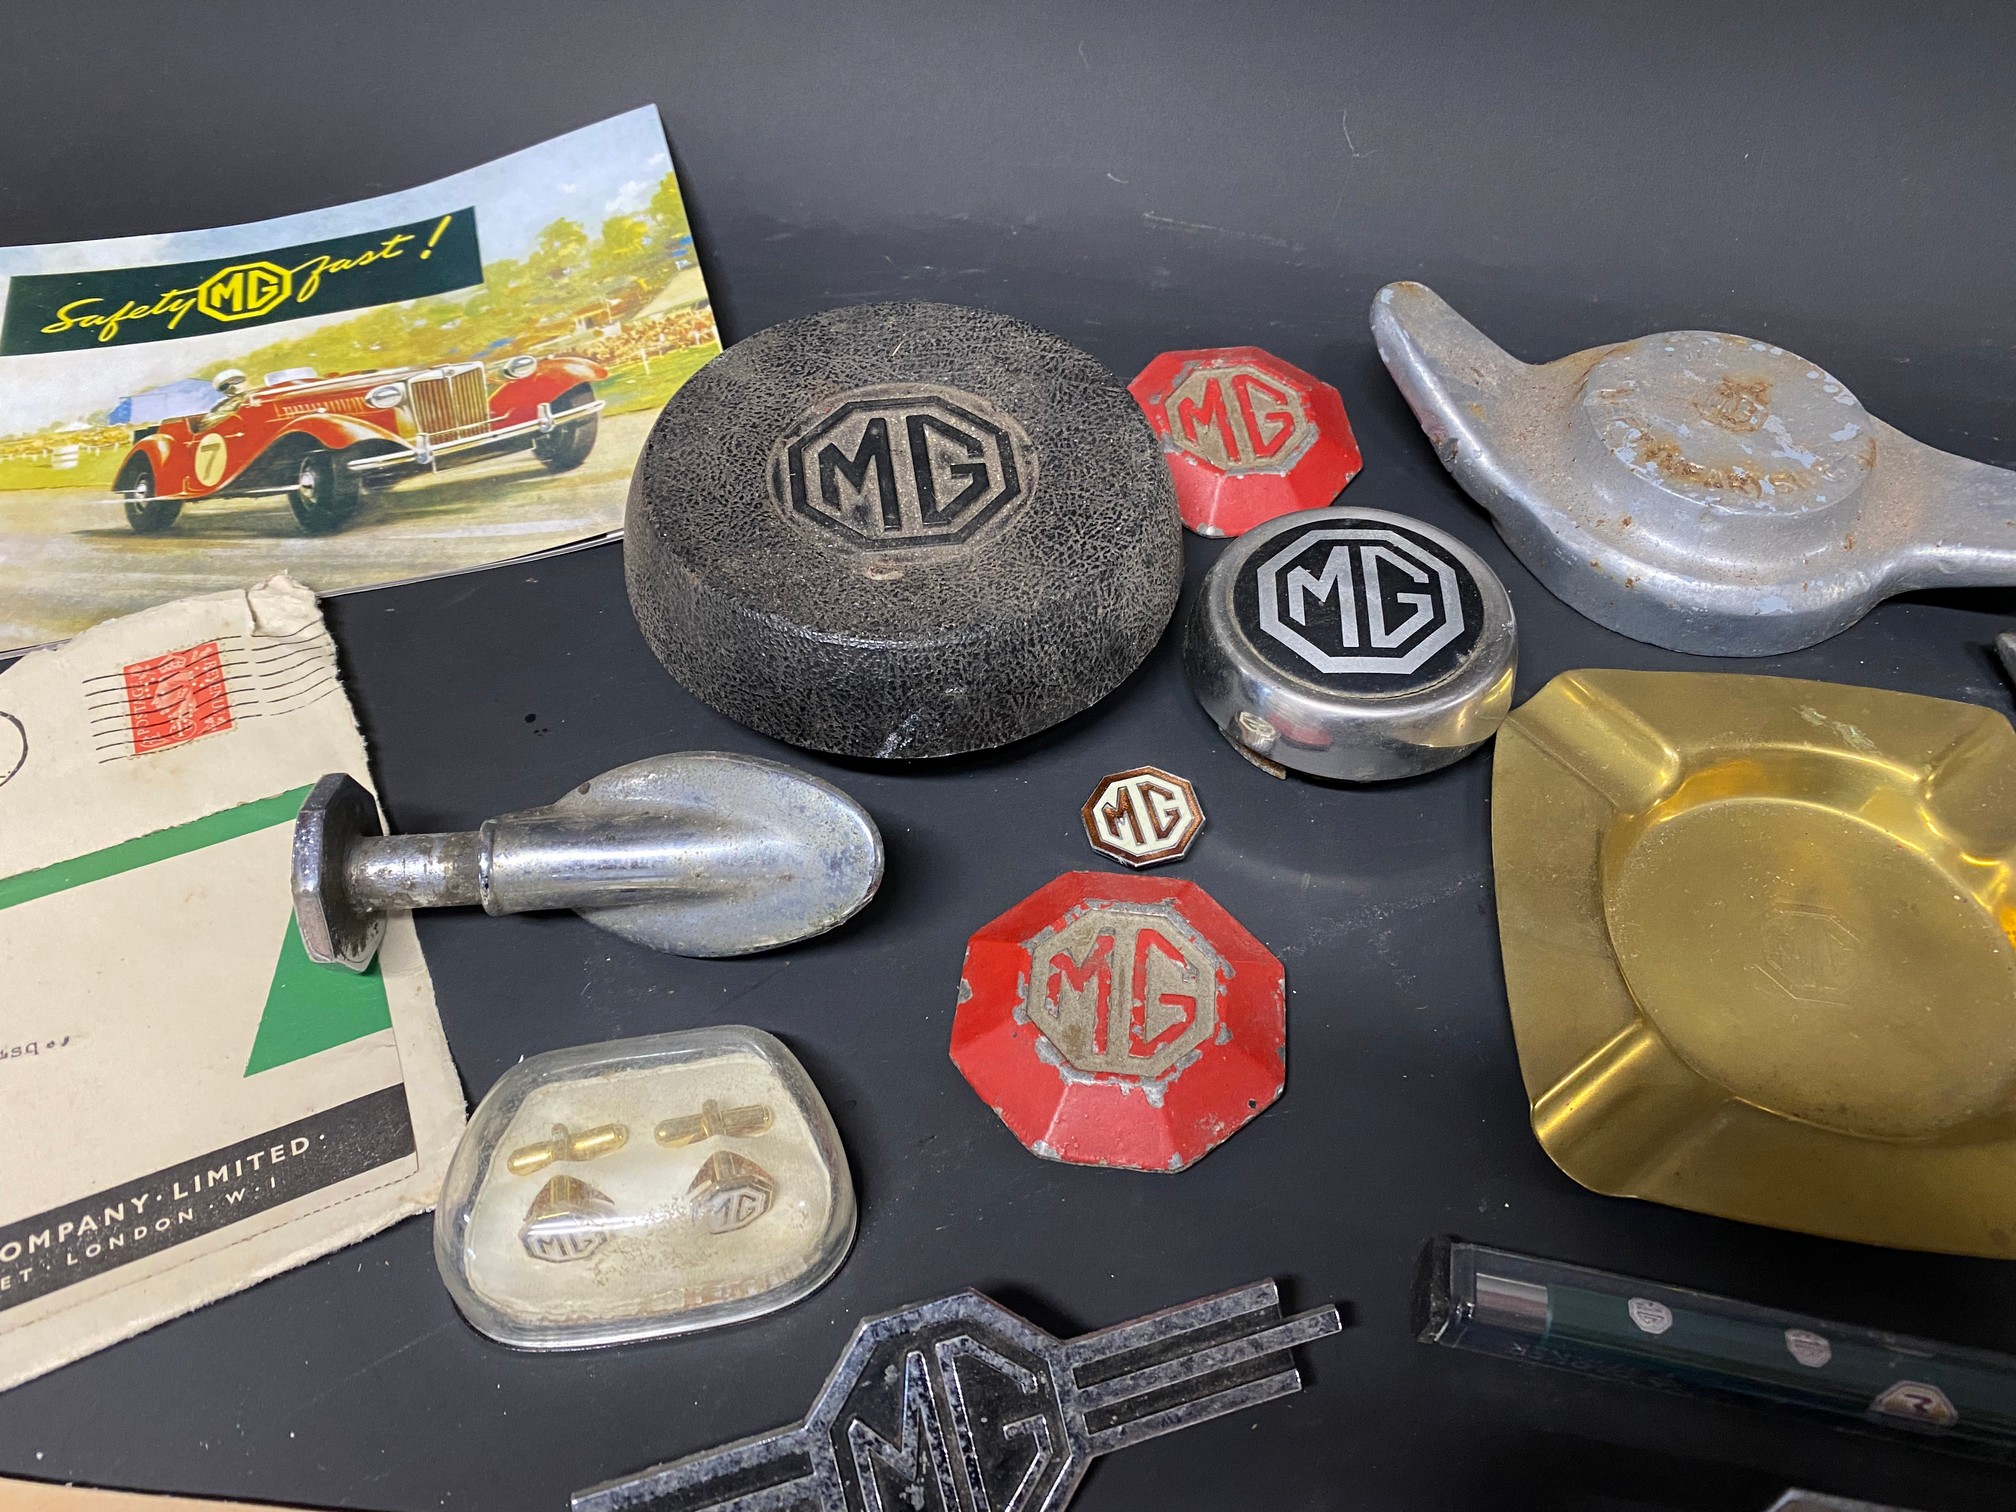 A selection of MG related promotional items, car insignia, branded car parts etc. - Image 2 of 3